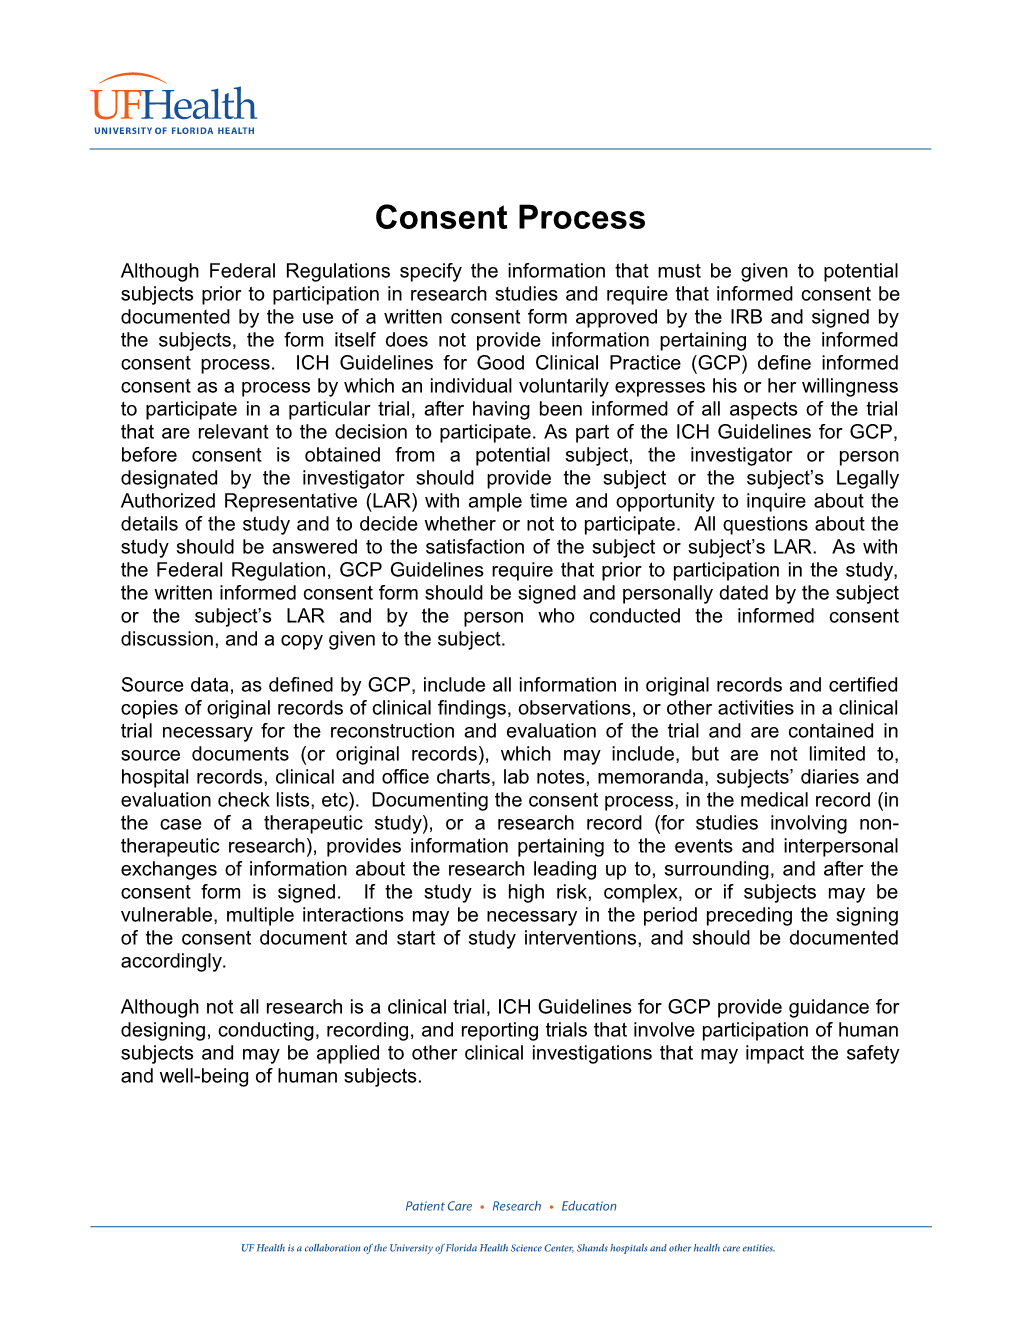 Example of Consent Process Note to Be Dictated Or Placed in Medical Record